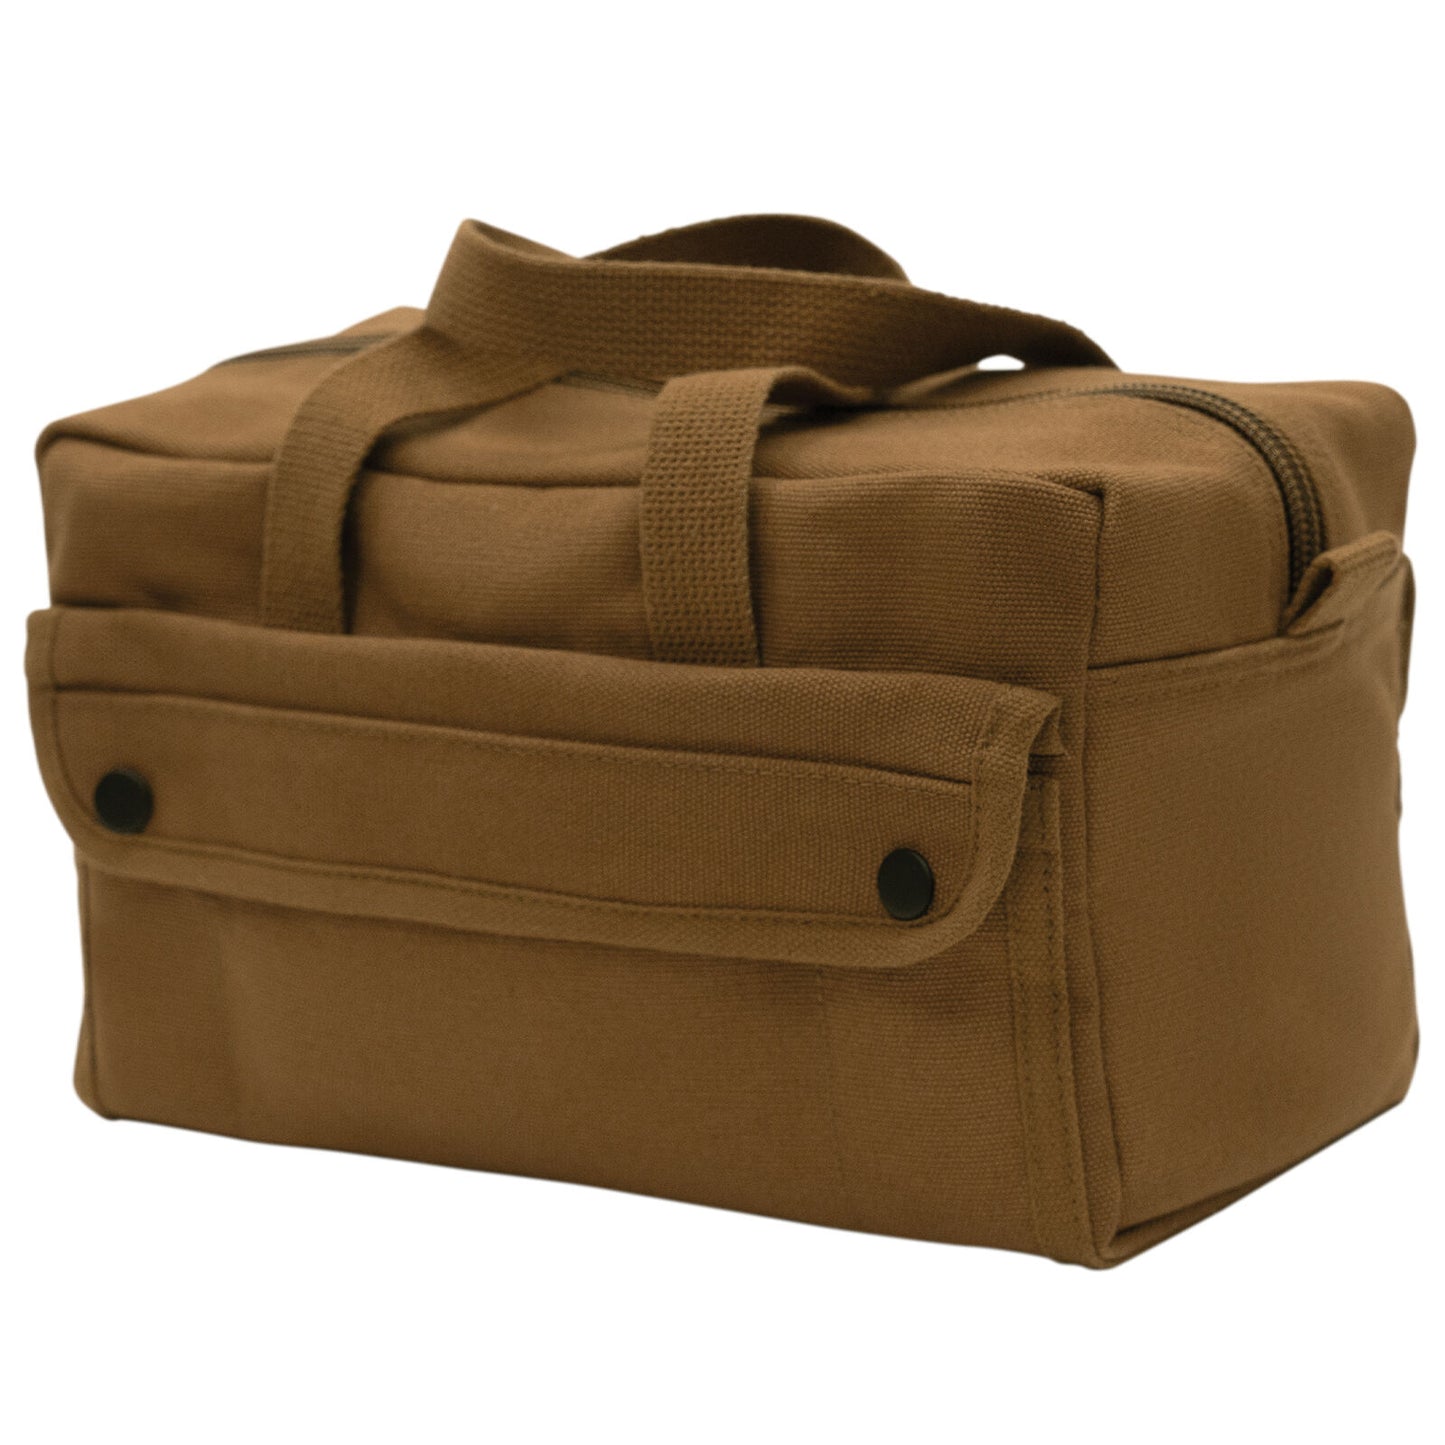 G.I. Style Mechanic's Tool Bag in Work Brown - Cotton Canvas Heavyweight Toolbag